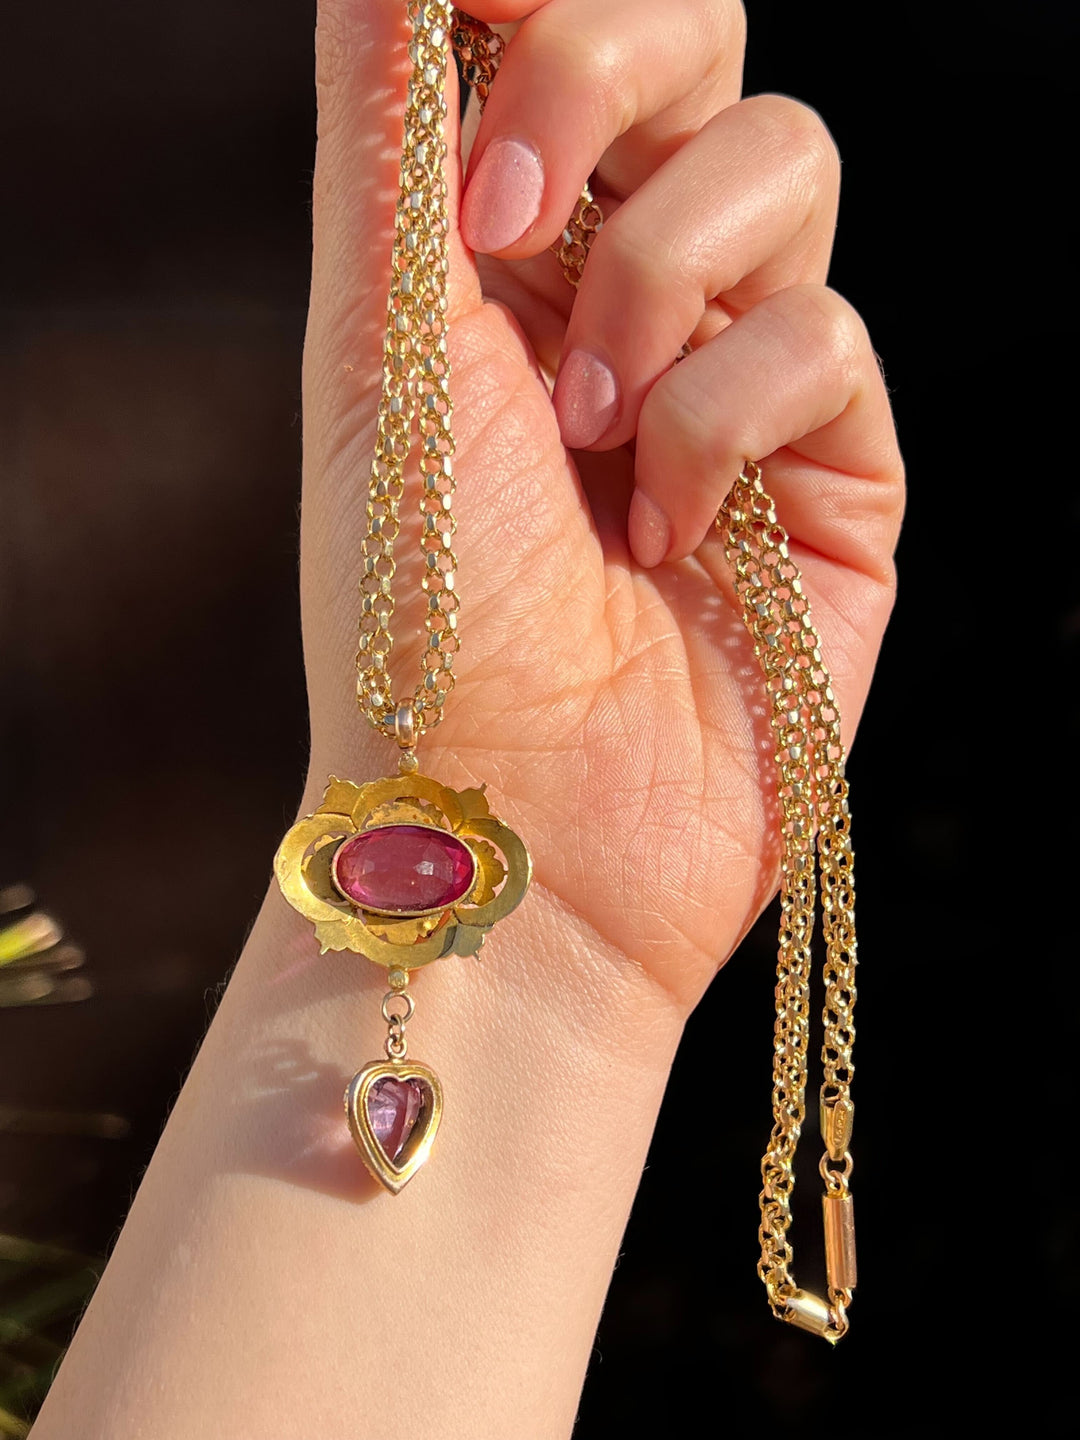 JUST PENDANT Pink Paste, Amethyst, Diamond and Pearl Lavaliere Necklace